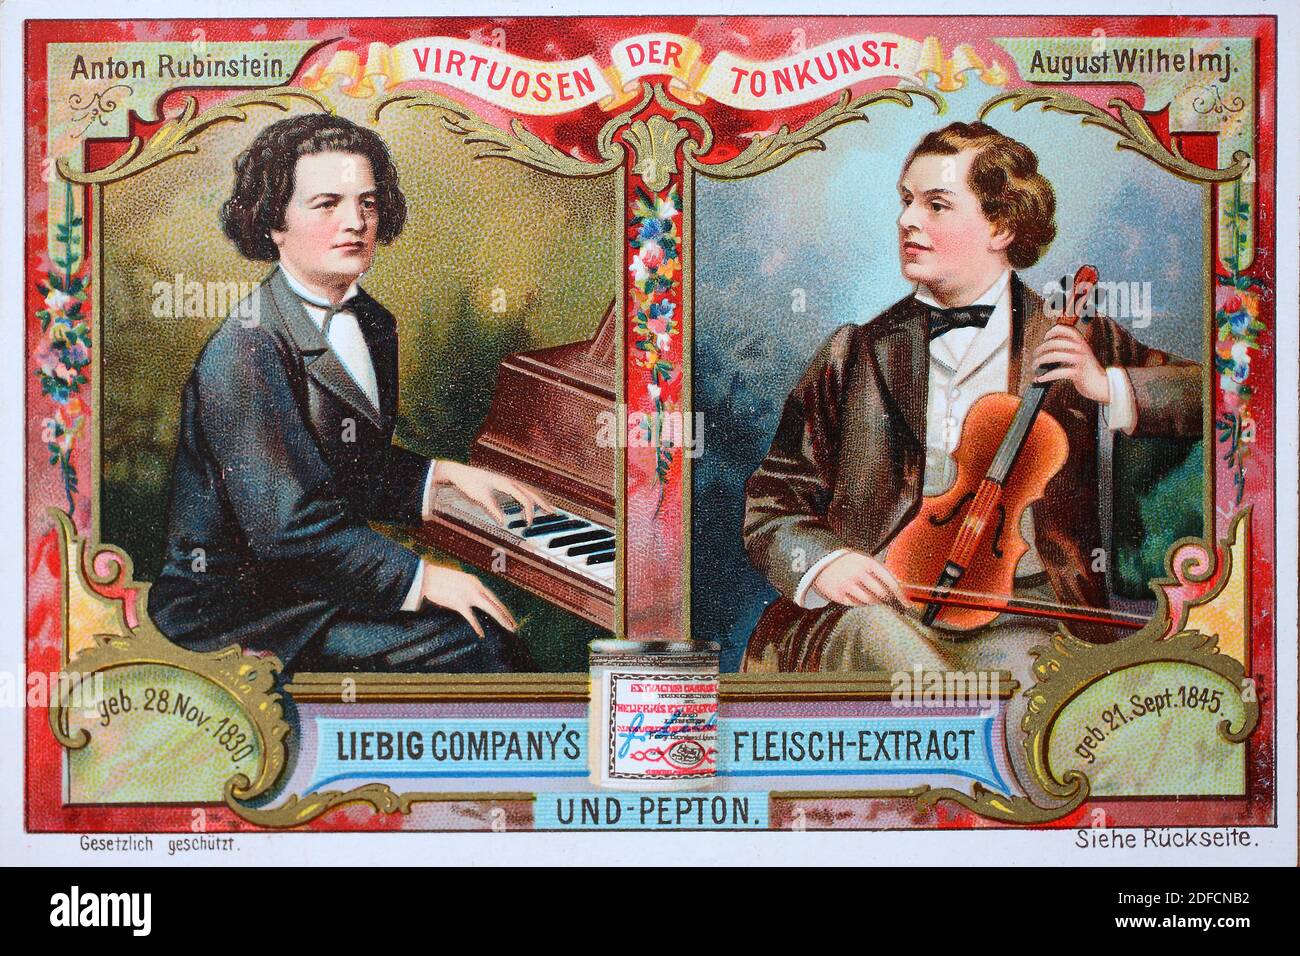 Picture series Virtuosi of the Art of Music, Anton Rubinstein and August Wilhelmj  /  Bildserie Virtuosen der Tonkunst, Anton Rubinstein und August Wilhelmj, Liebigbild, digital improved reproduction of a collectible image from the Liebig company, estimated from 1900, pd  /  digital verbesserte Reproduktion eines Sammelbildes von ca 1900, gemeinfrei, Stock Photo